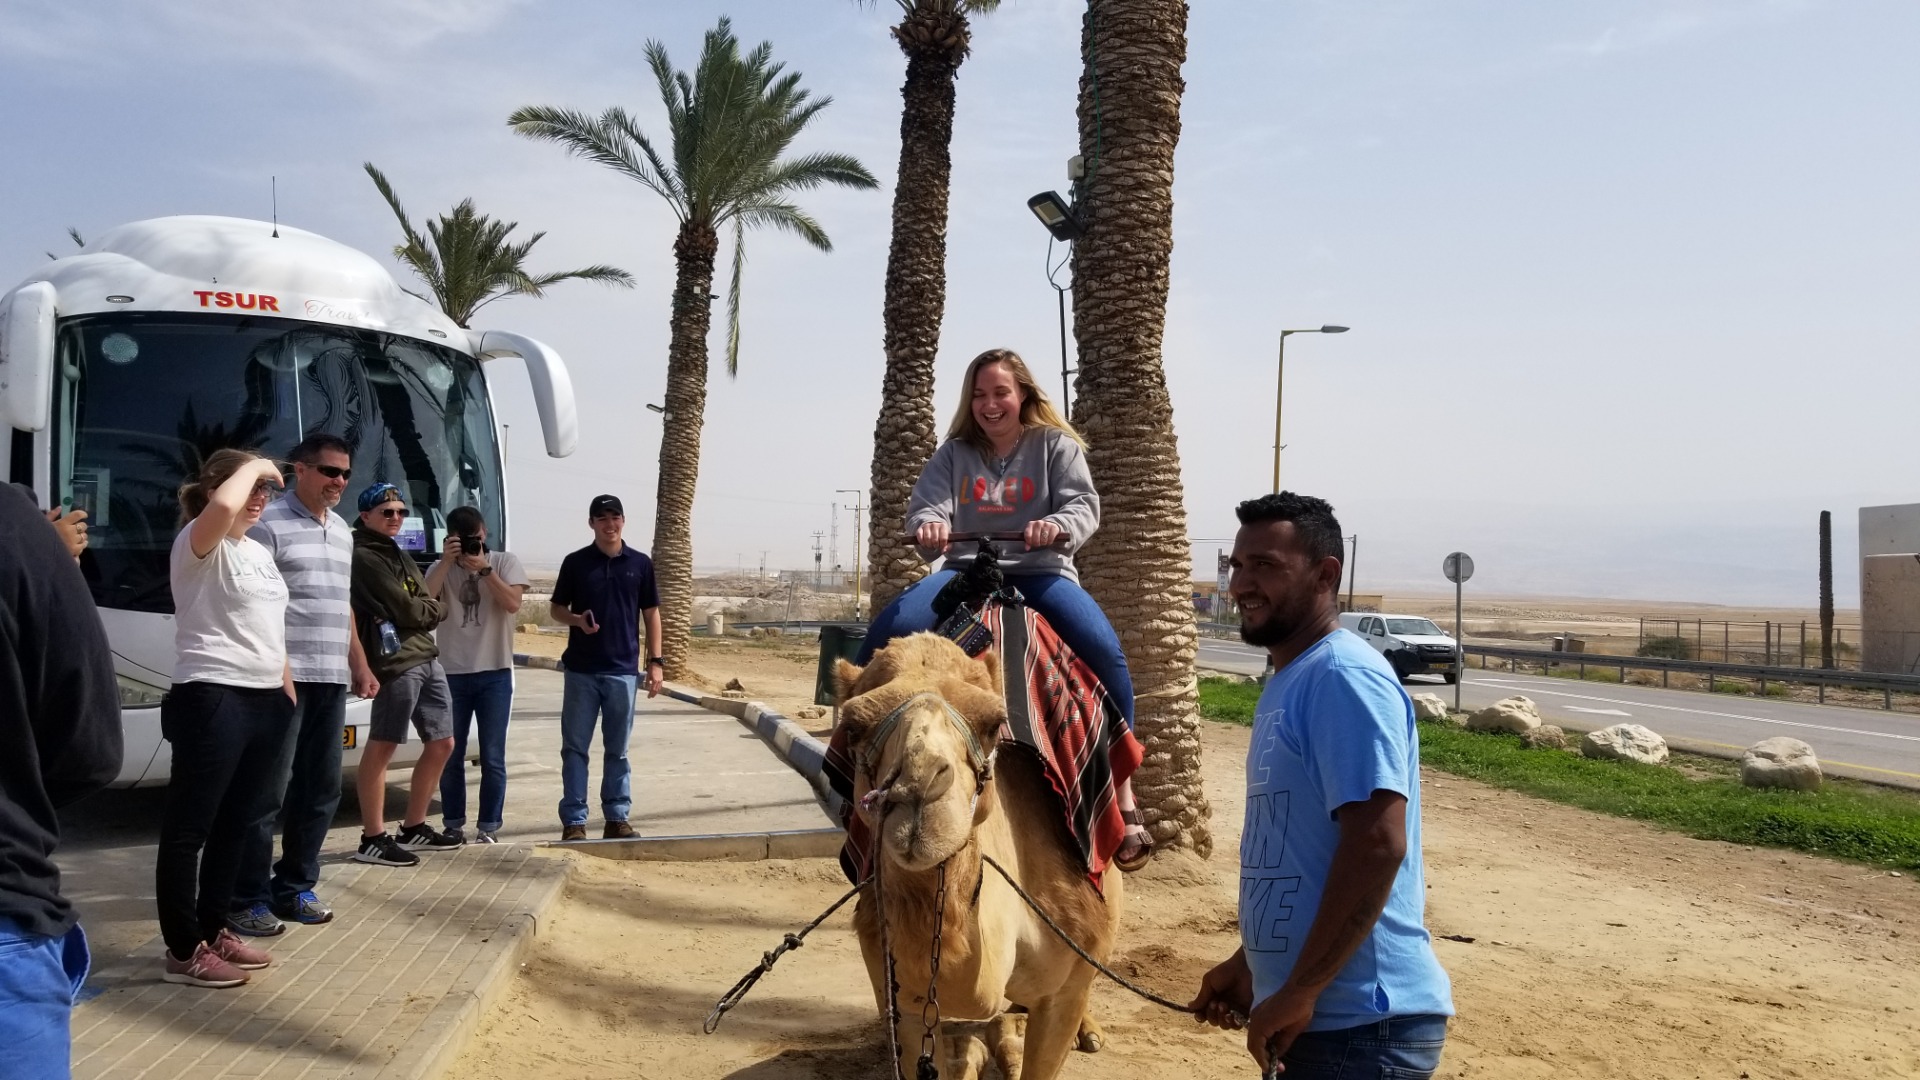 The Dead Sea and Camel Rides